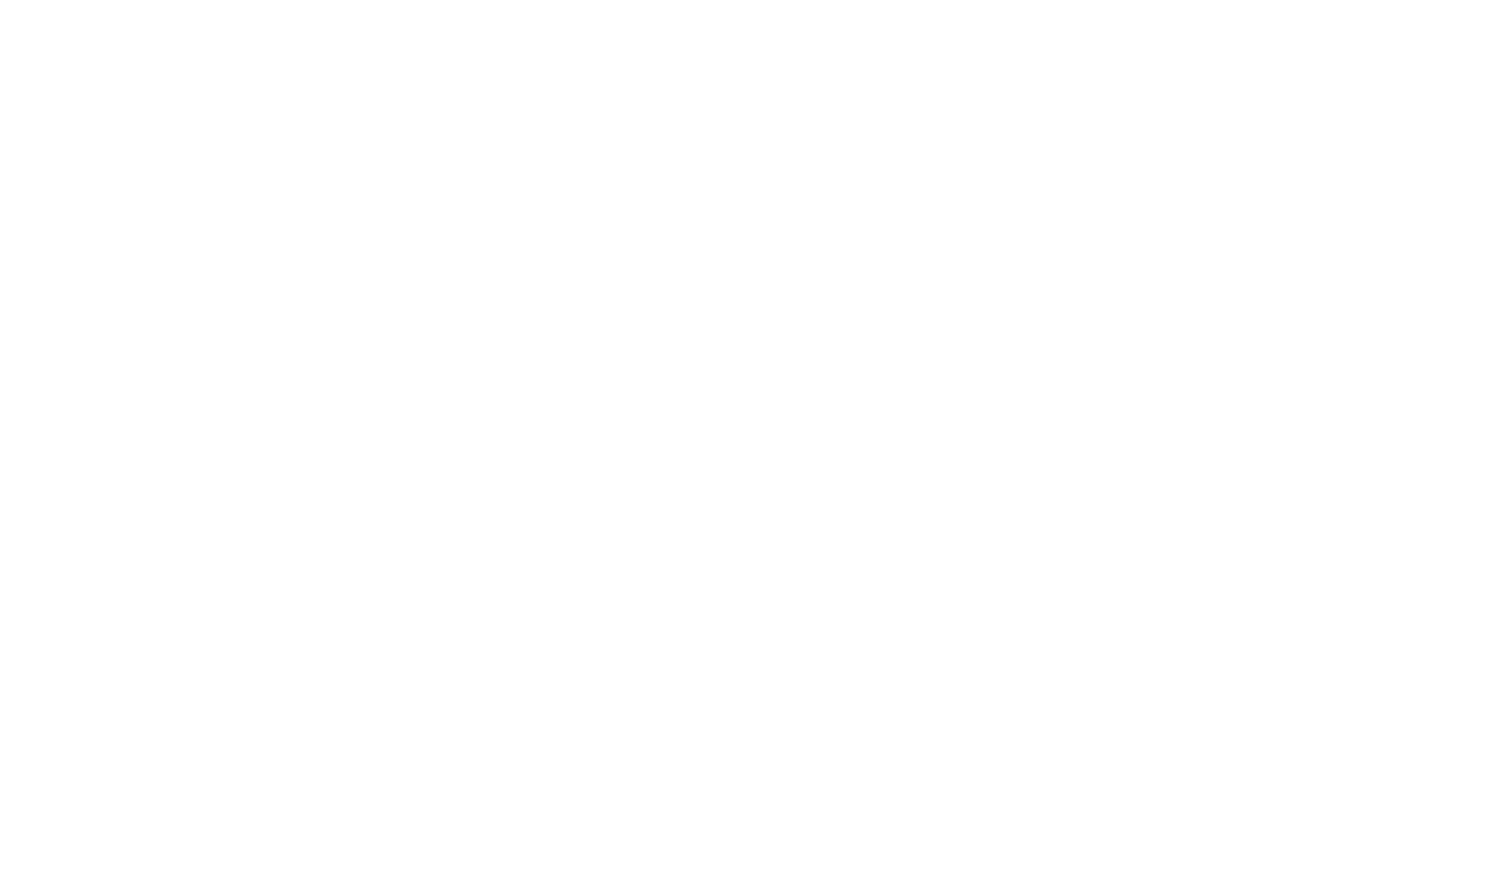 Lake Forest Ranch